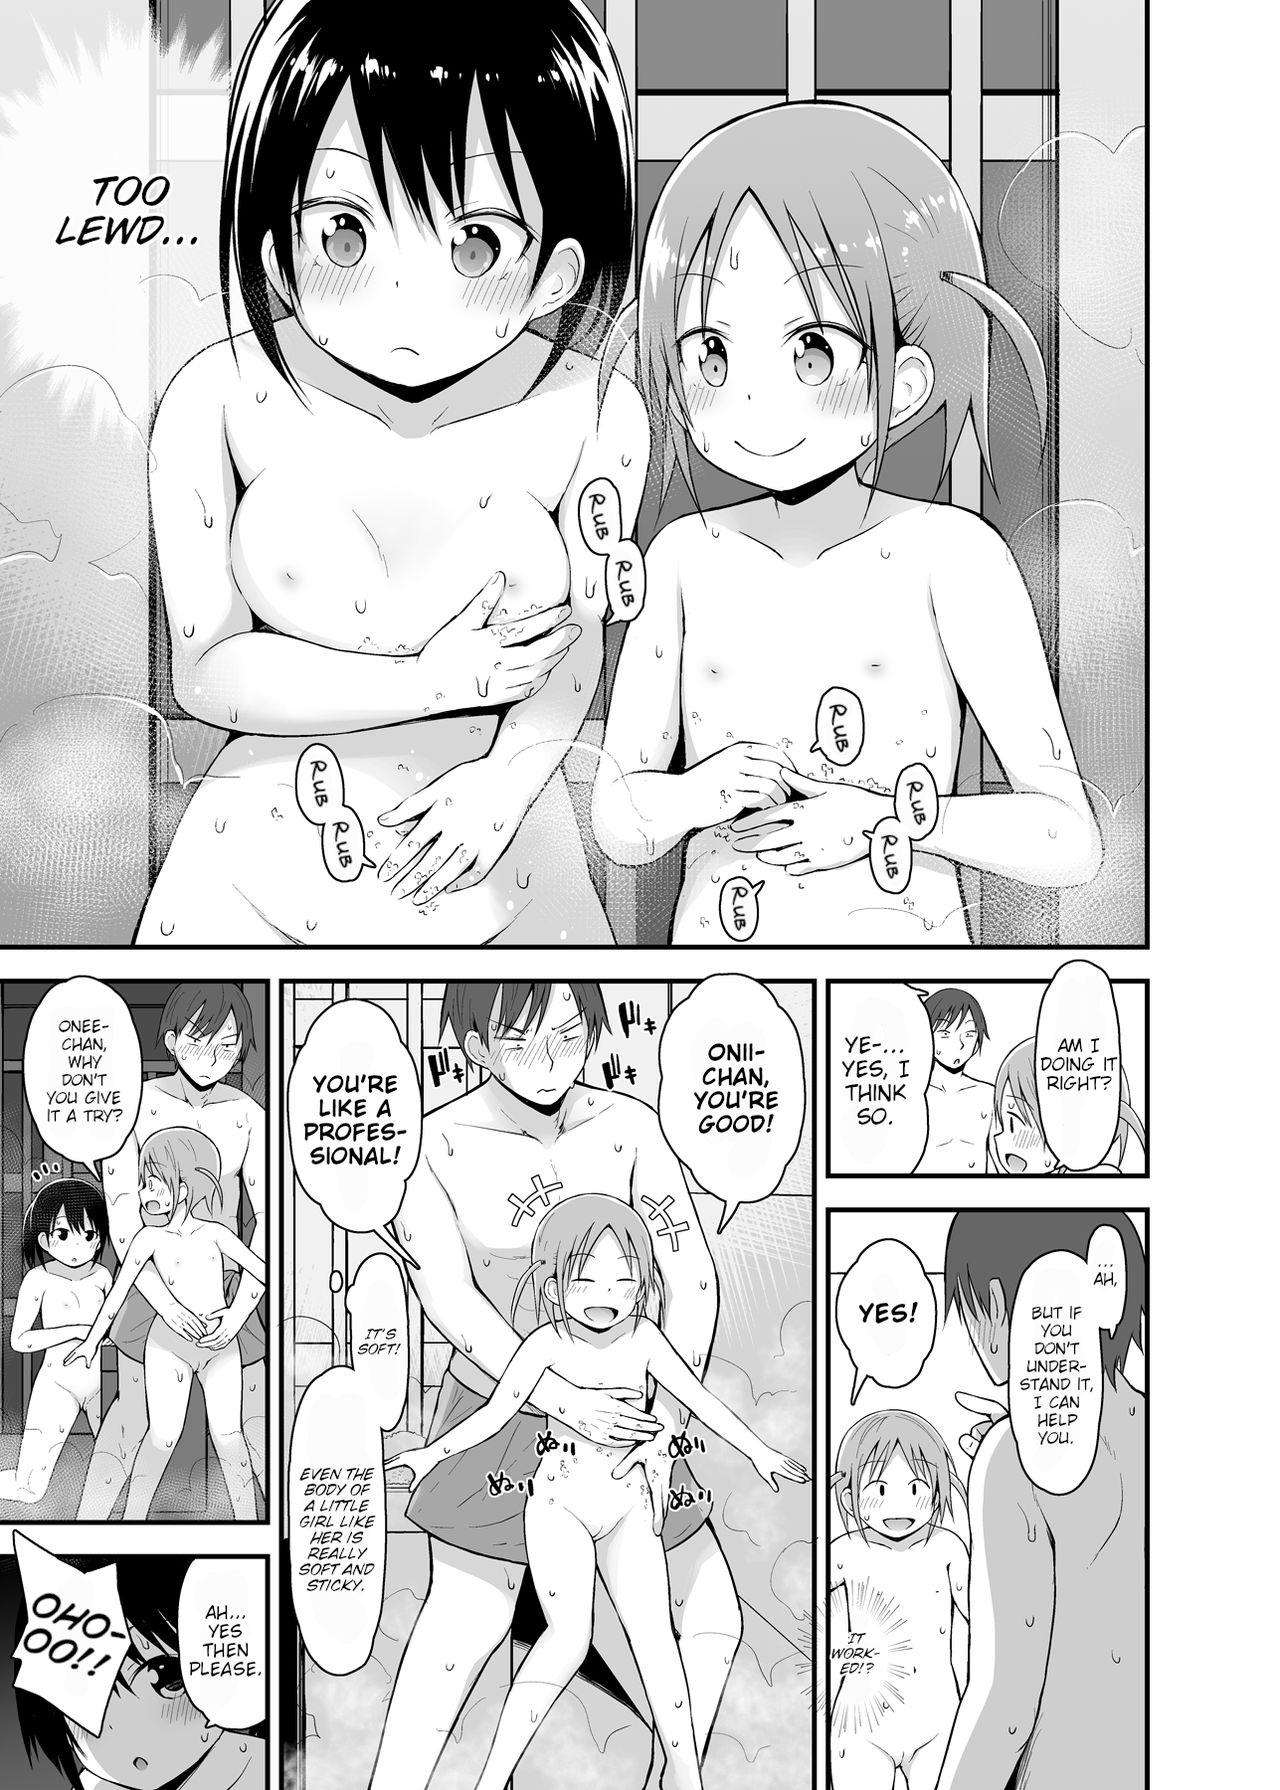 Onnanoko datte Otokoyu ni Hairitai 3 | They may just be little girls, but they still want to enter the men's bath! 3 7